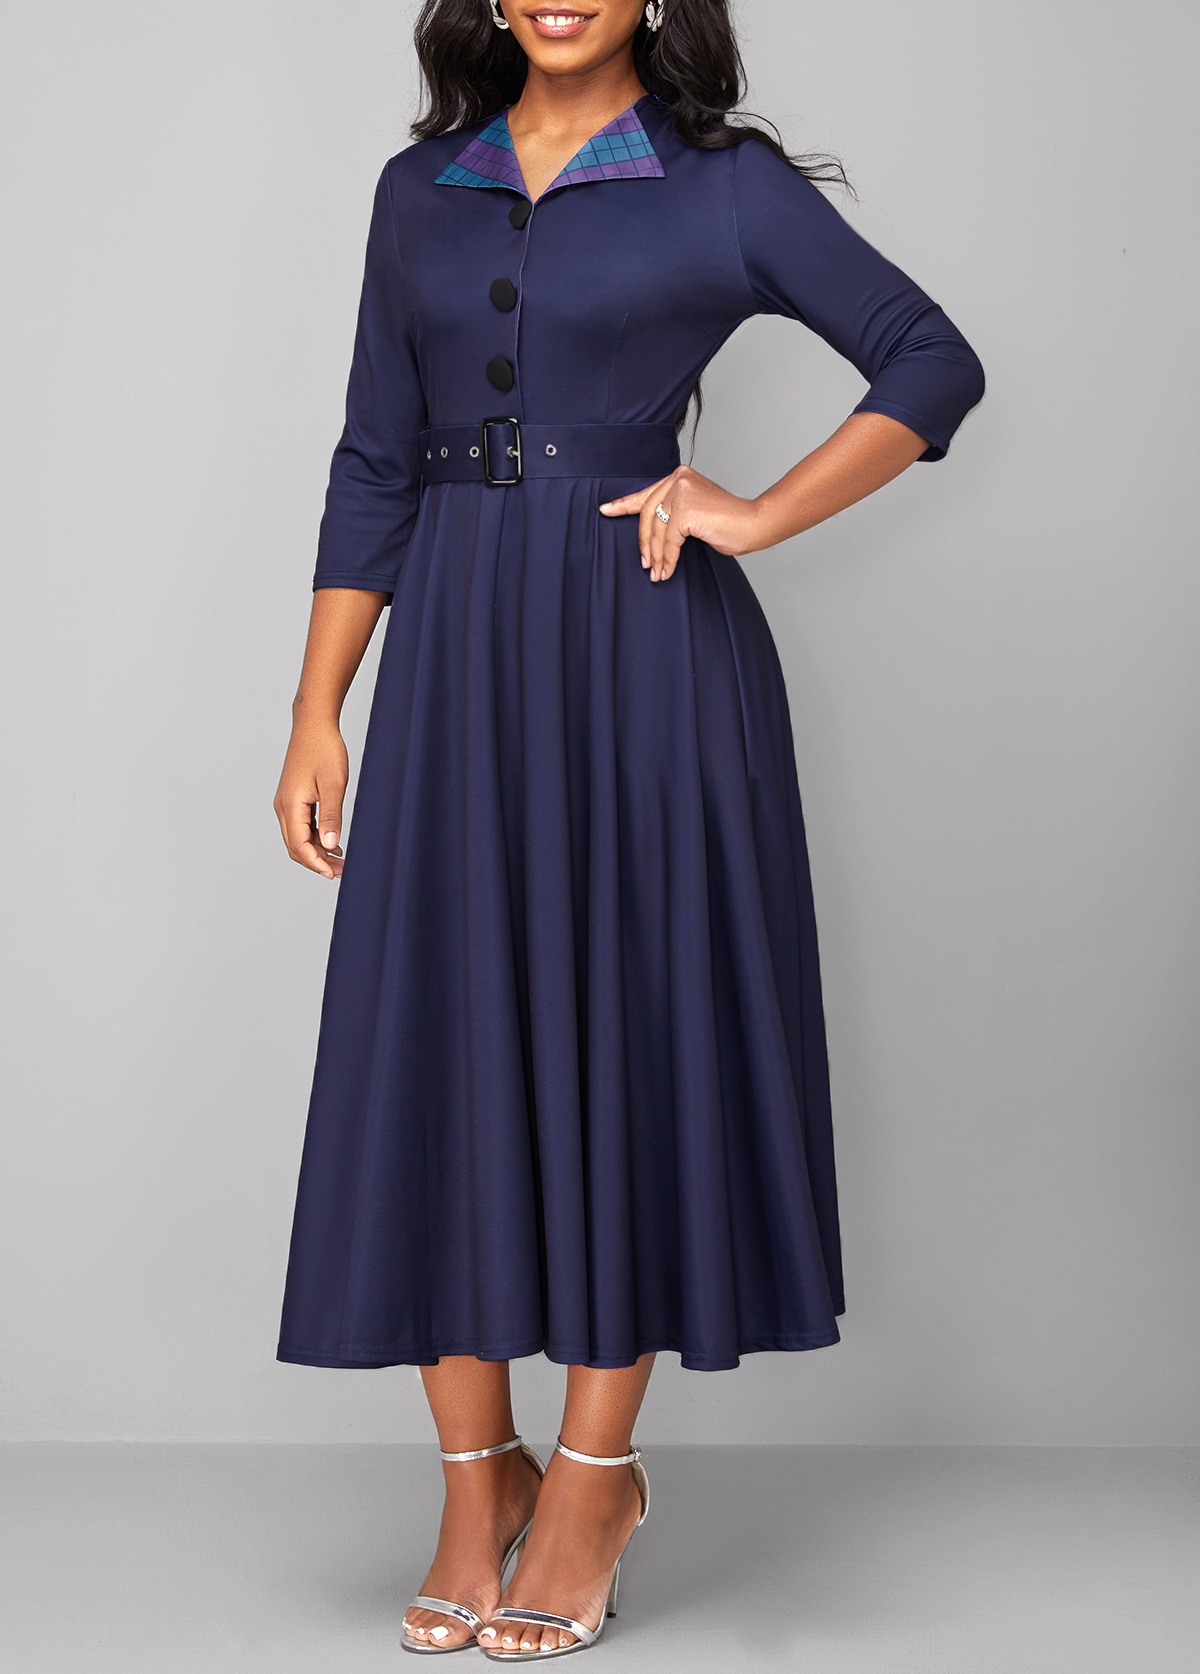 Plaid Button Belted Navy Turn Down Collar Dress